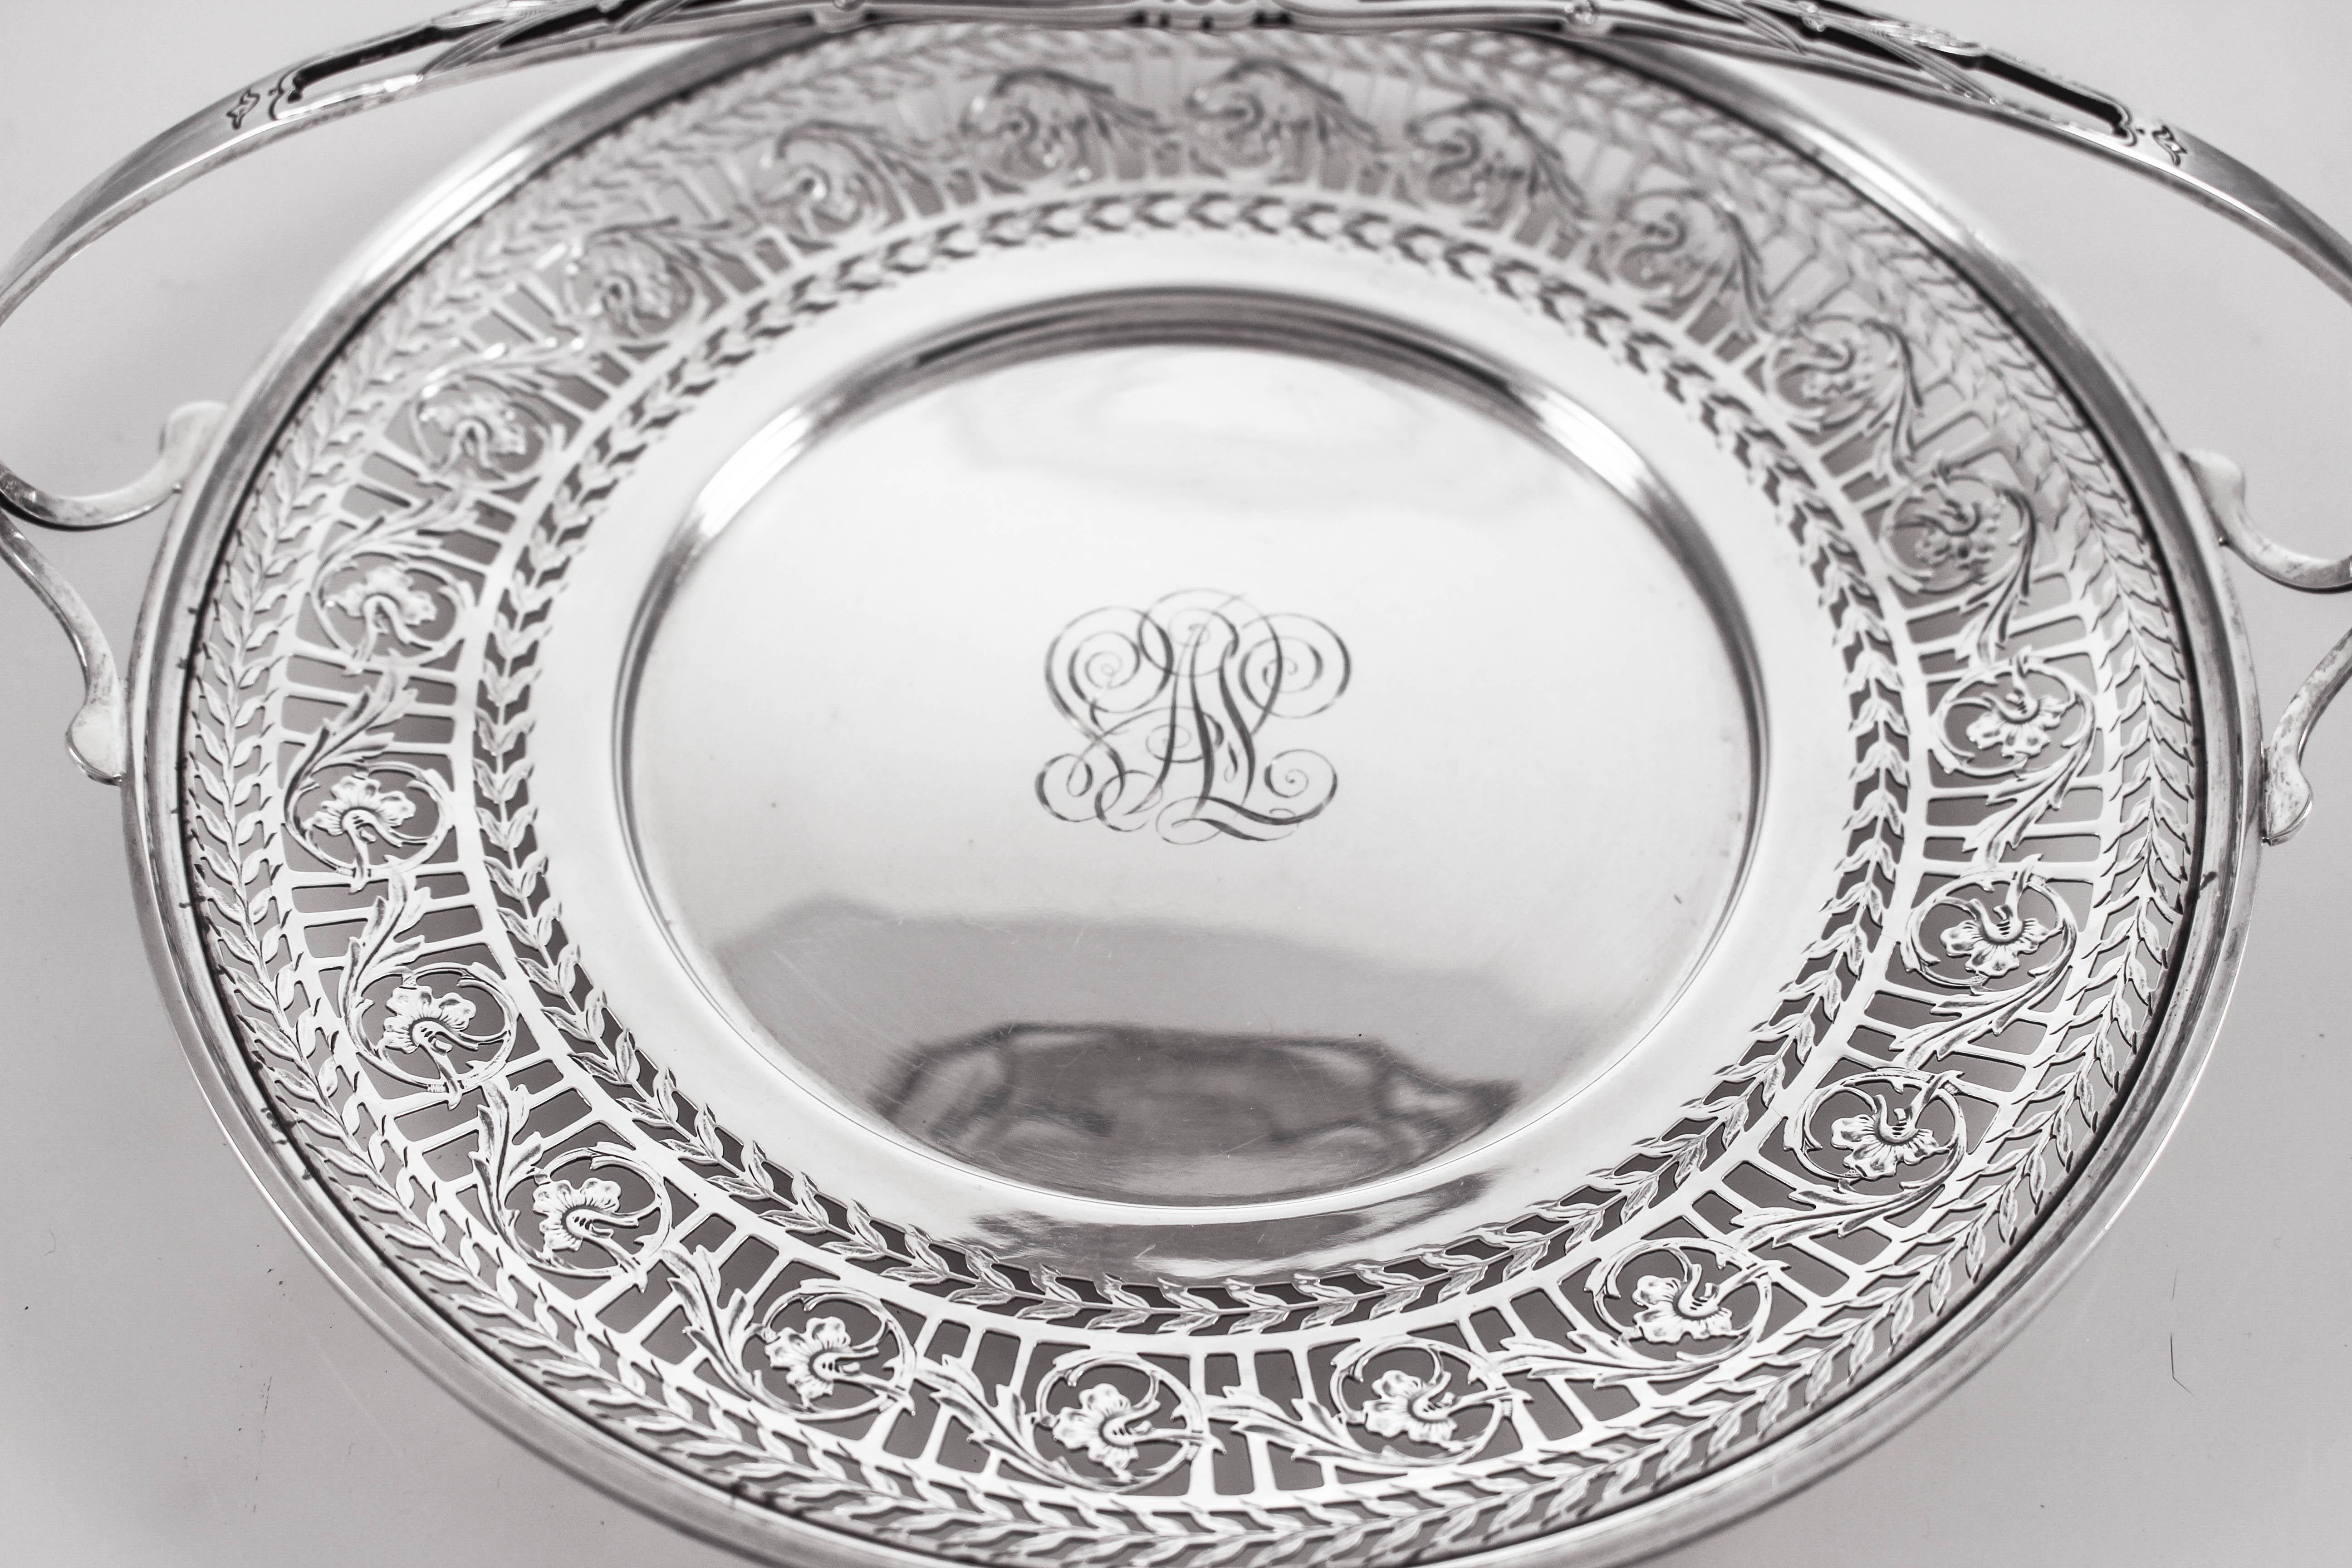 We are proud to offer this sterling silver basket made in 1916 (signed) by the Gorham Silver Co of Providence, Rhode Island. Gorham was one of the premier Silversmiths in the USA and there pieces are a testament to the quality silver pieces they